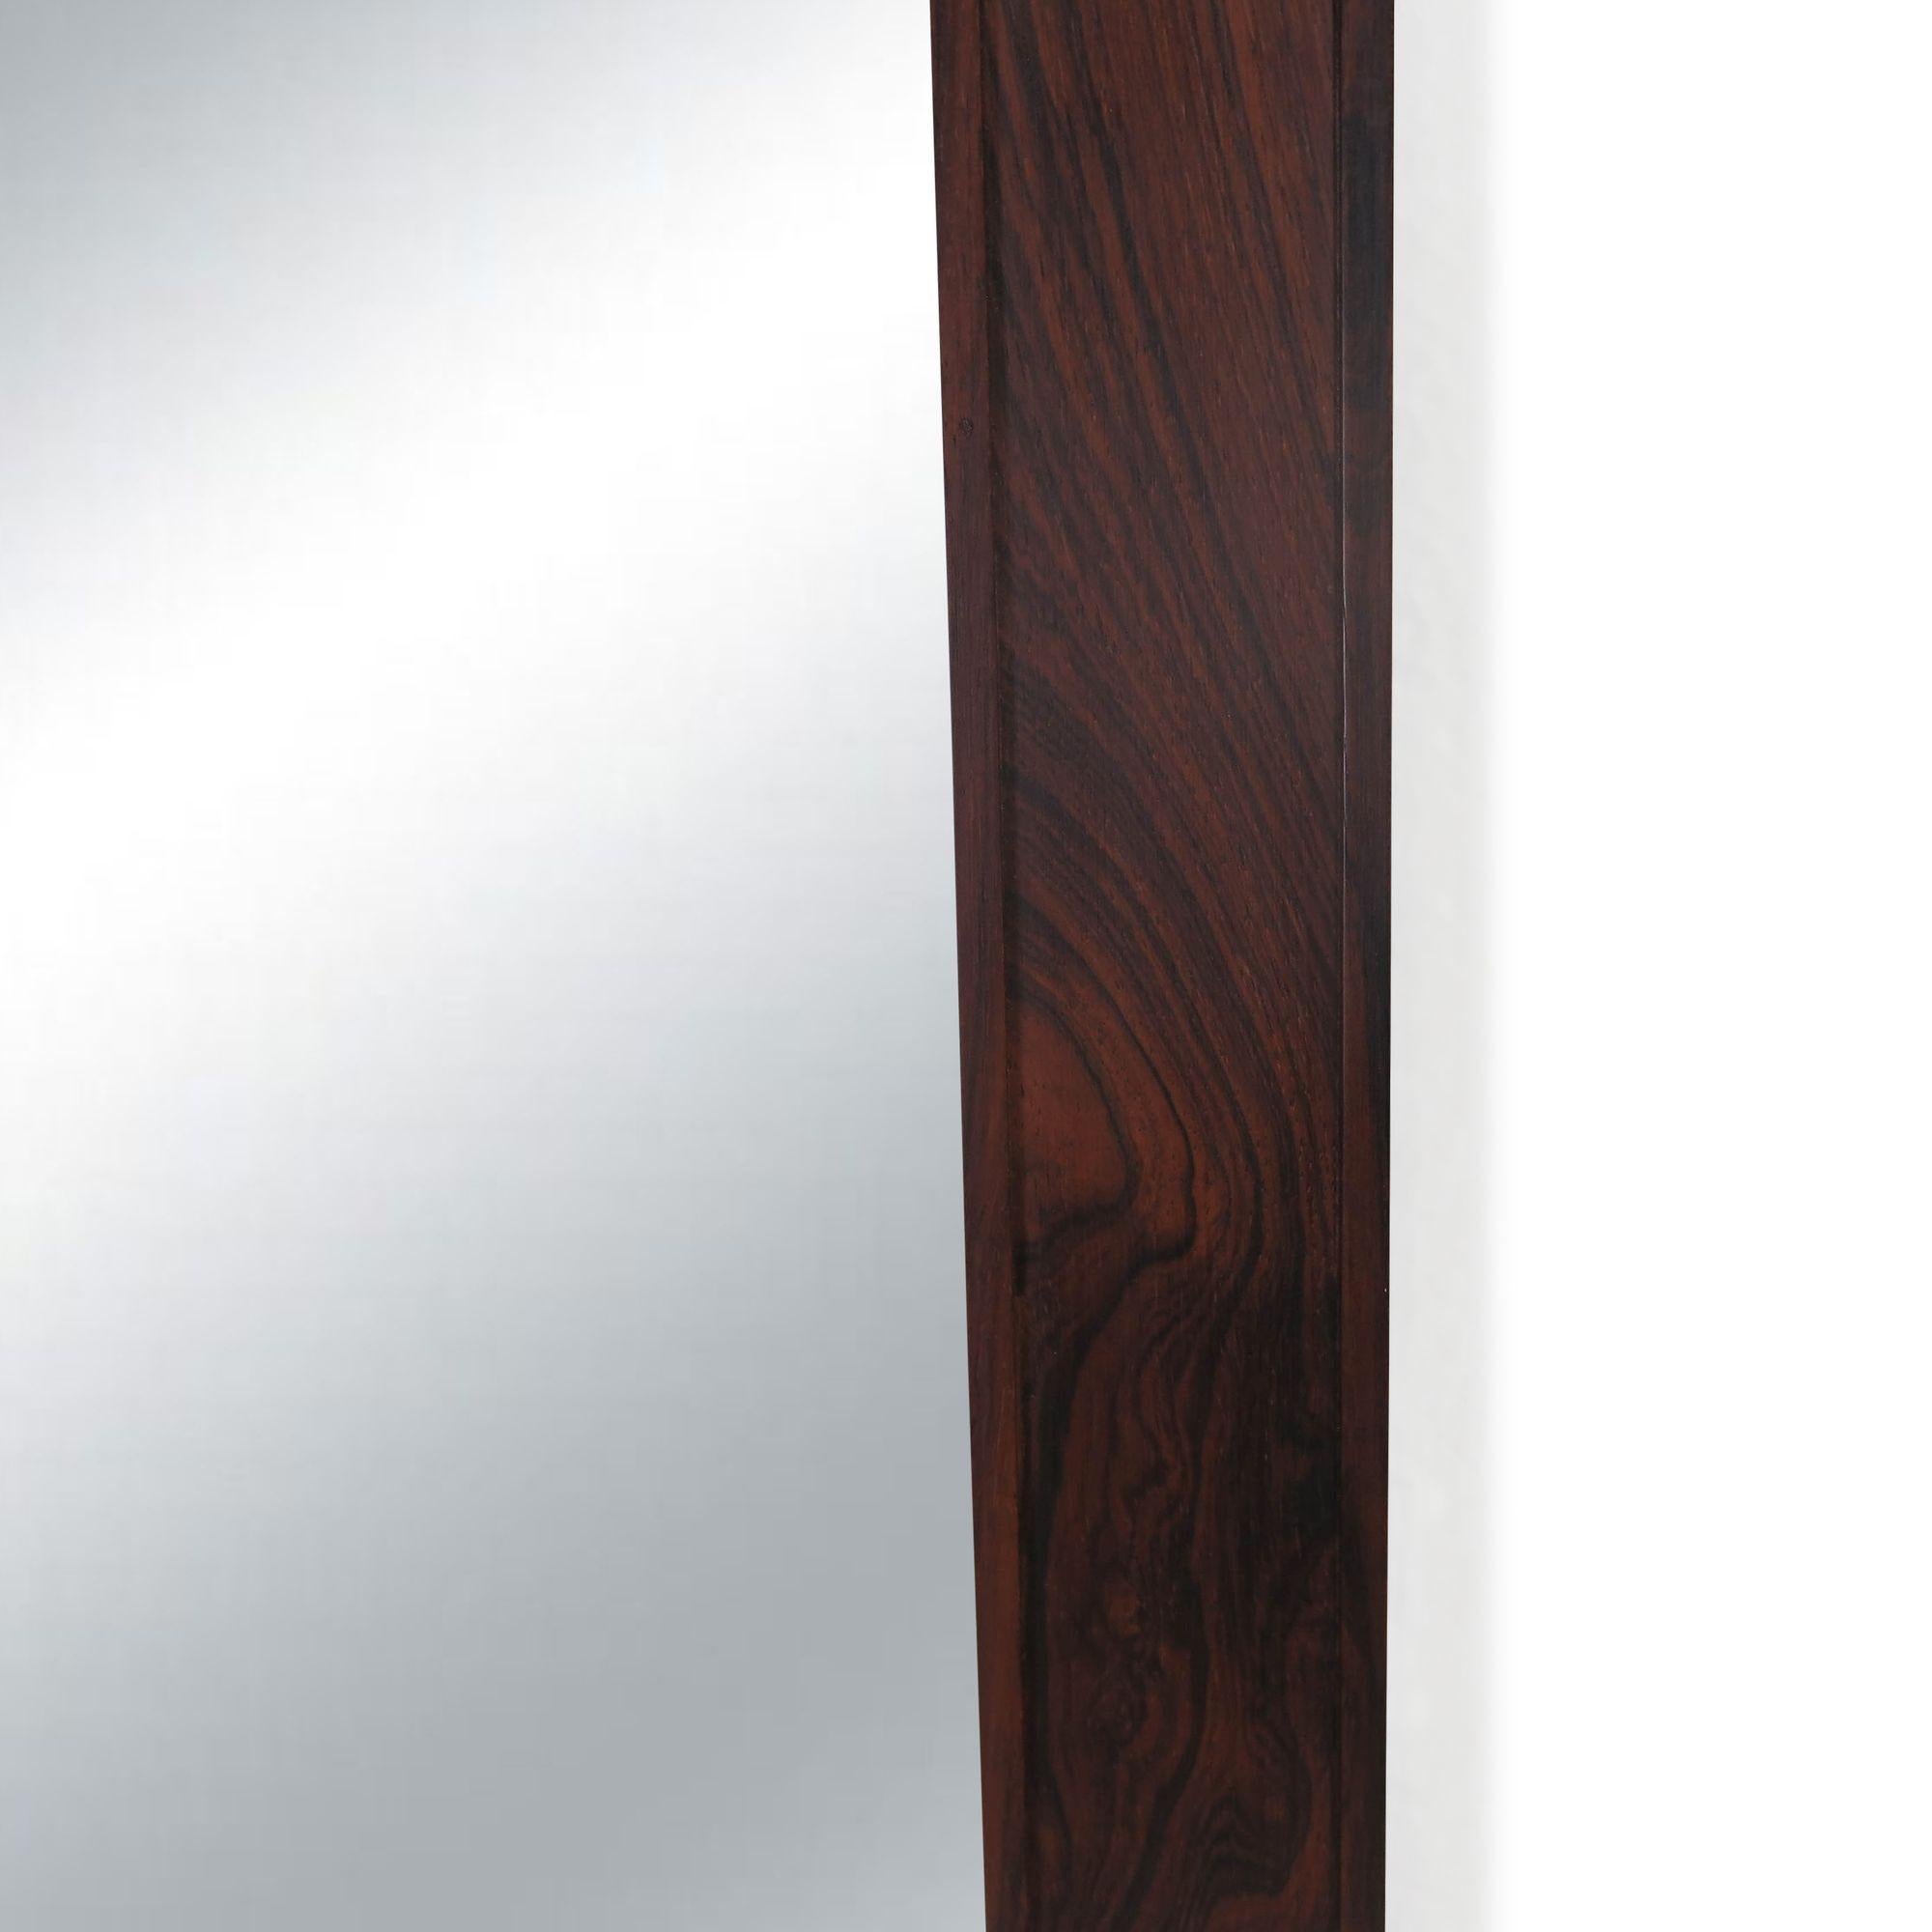 Jansen Spejle rectangular mirror with a frame crafted from beautifully grained rosewood. Stamped
Measurements
W 19,25'' x D 0,75'' x H 46''